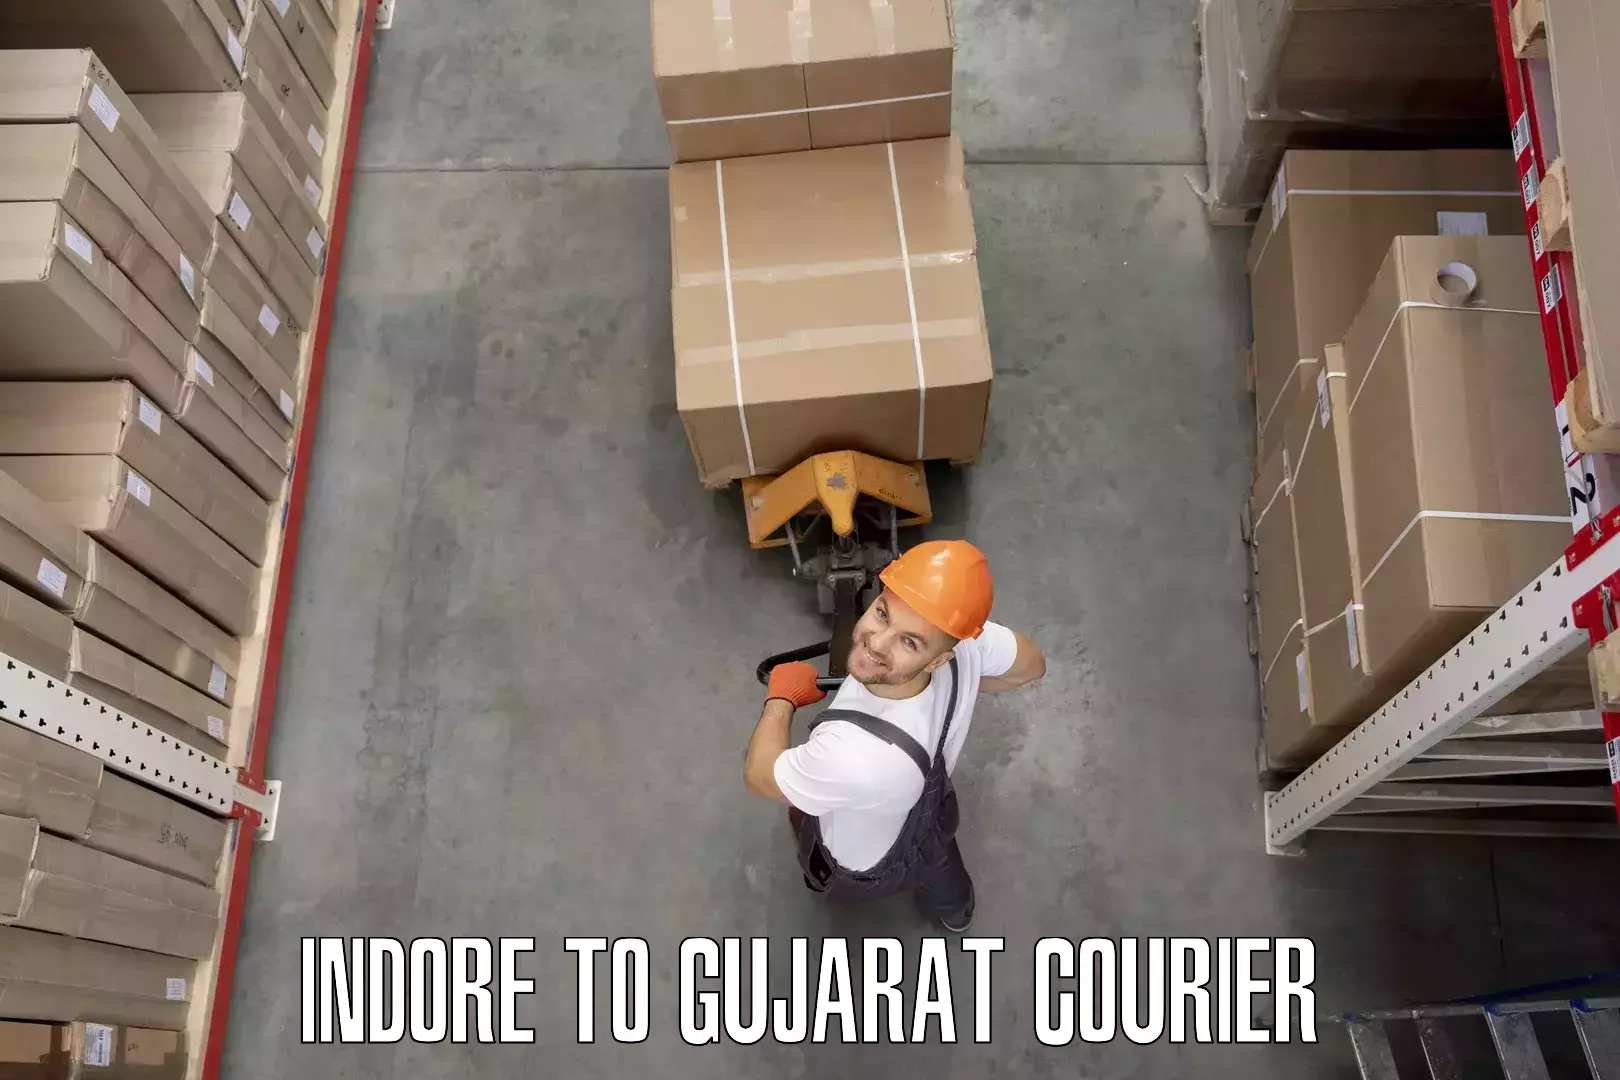 Furniture delivery service Indore to Patan Gujarat